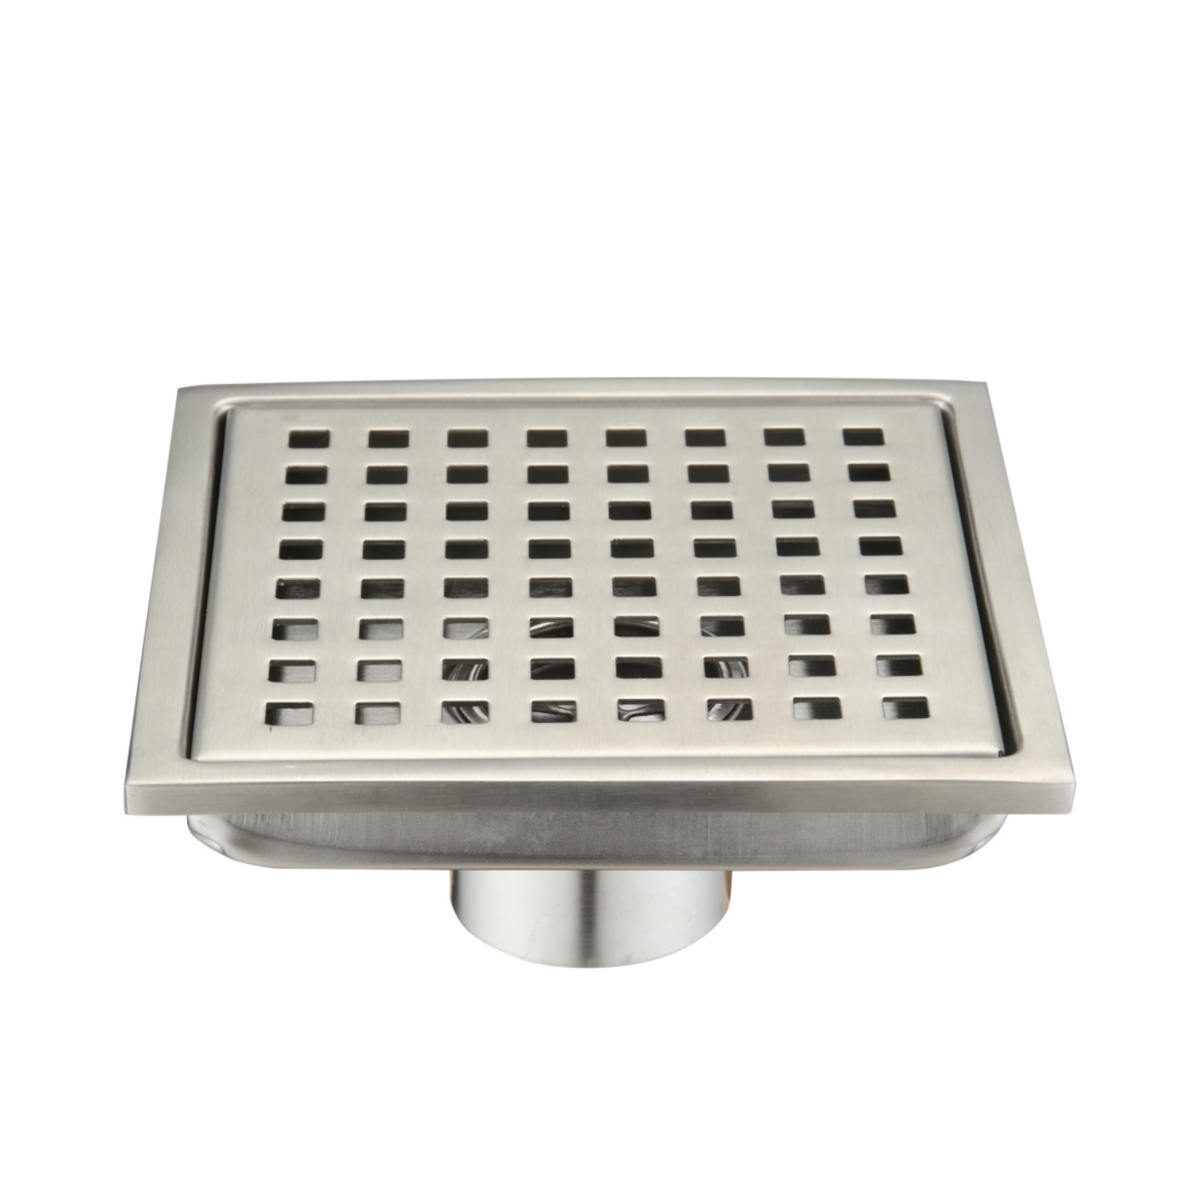 6 Inch Square Shower Floor - Silver